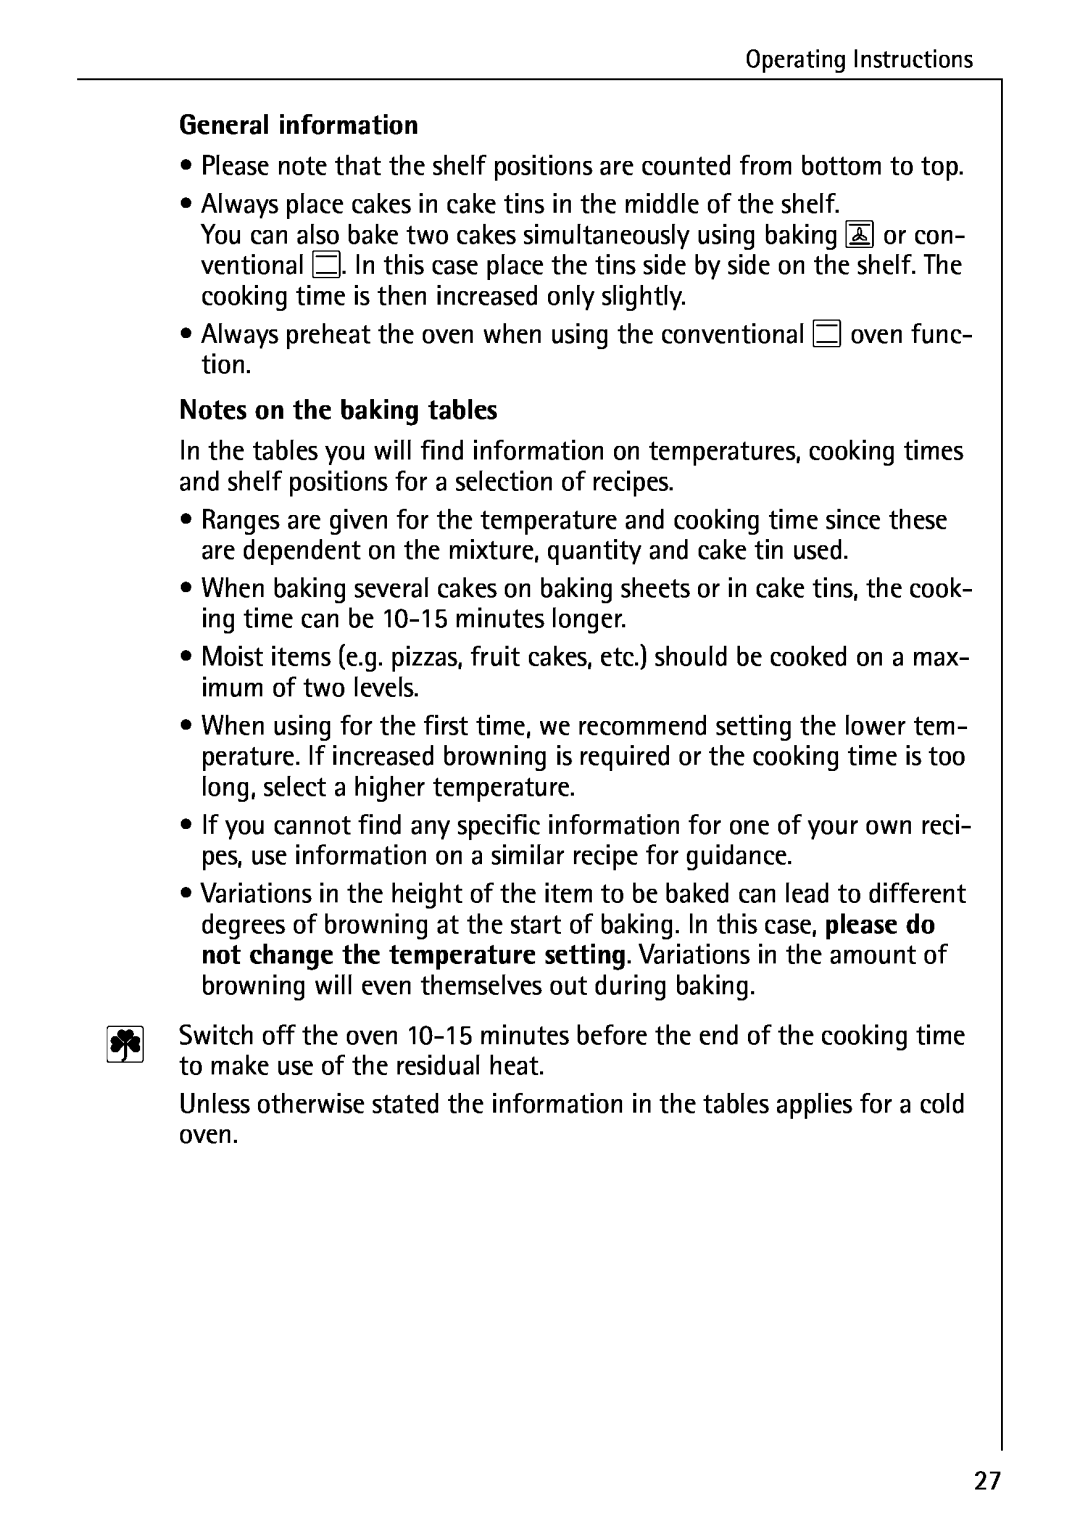 Electrolux B4140-1 manual General information, Notes on the baking tables 